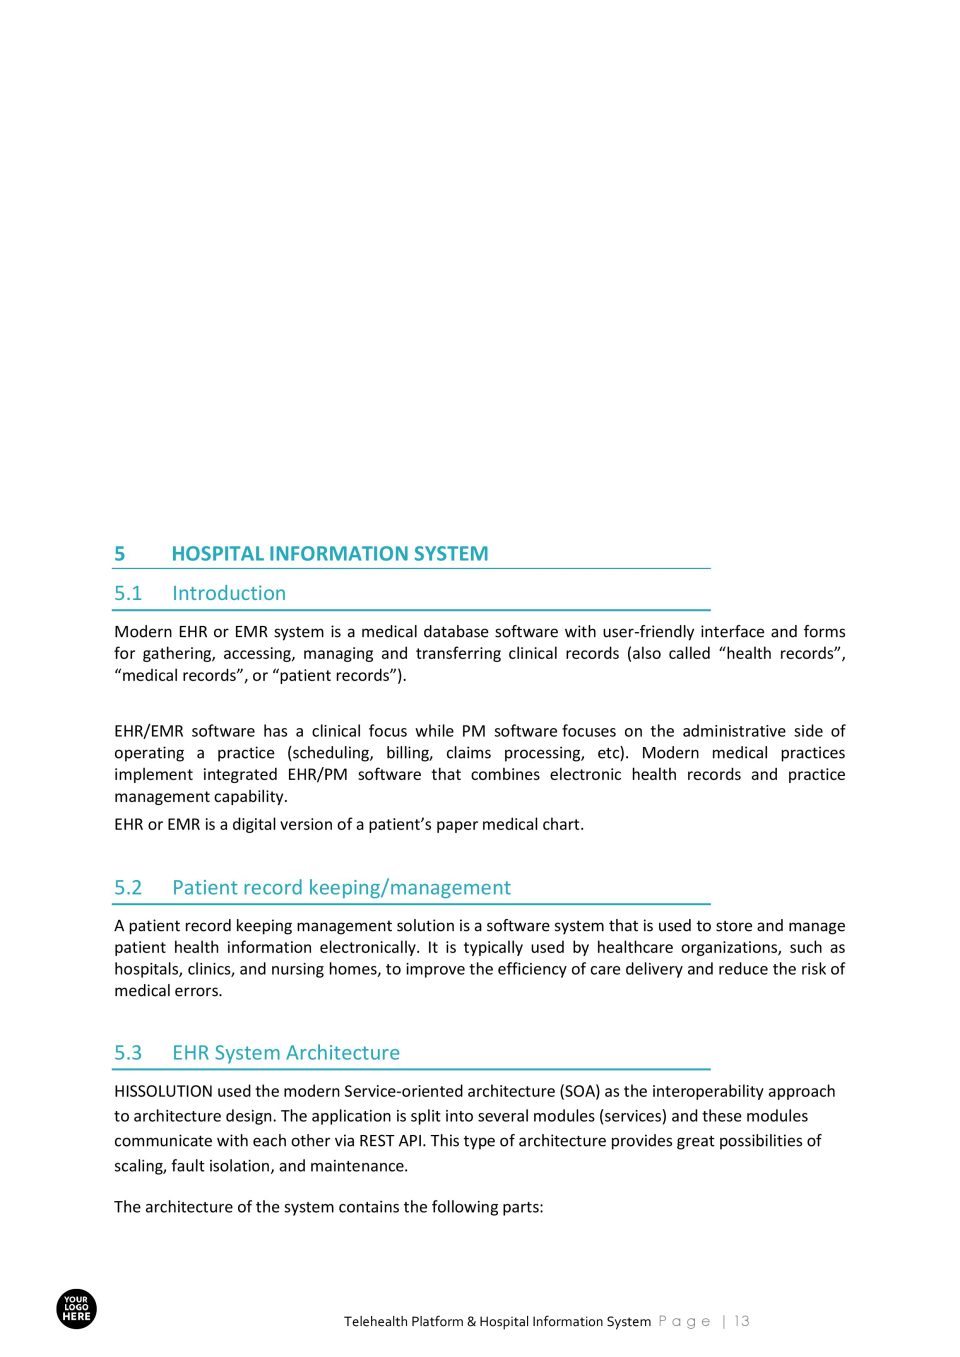 Business Proposal Hospital Information System Template 13 scaled